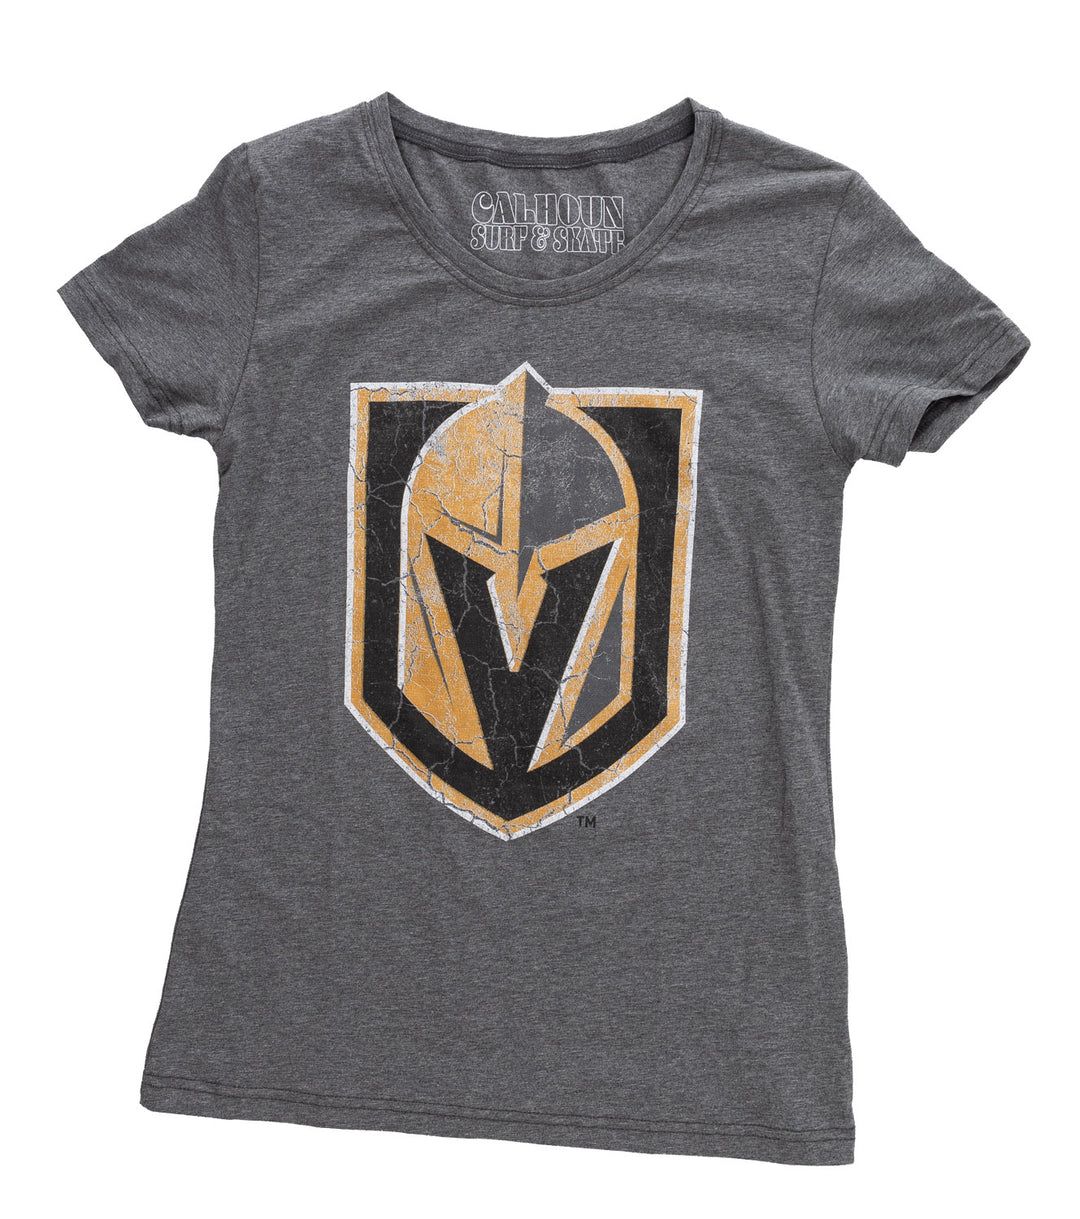 Vegas Golden Knights Women's Distressed Print Fitted Crew Neck Premium T-Shirt - Charcoal